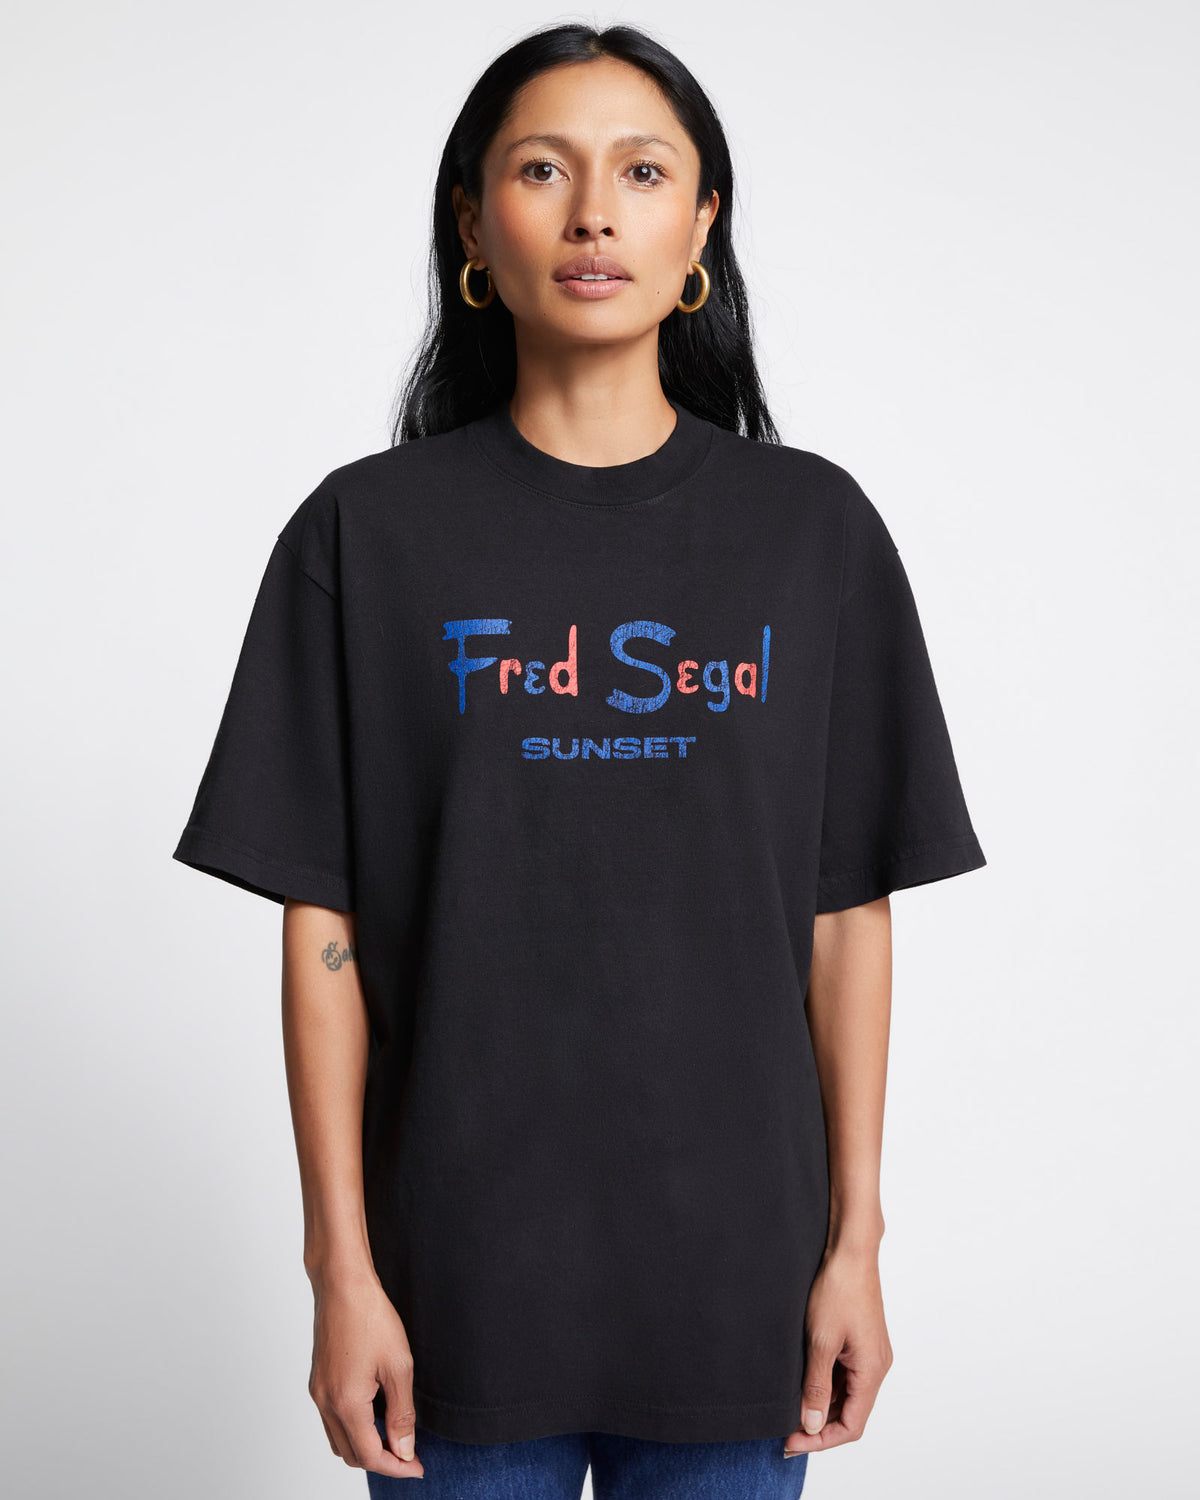 Fred Segal Sunset Tee